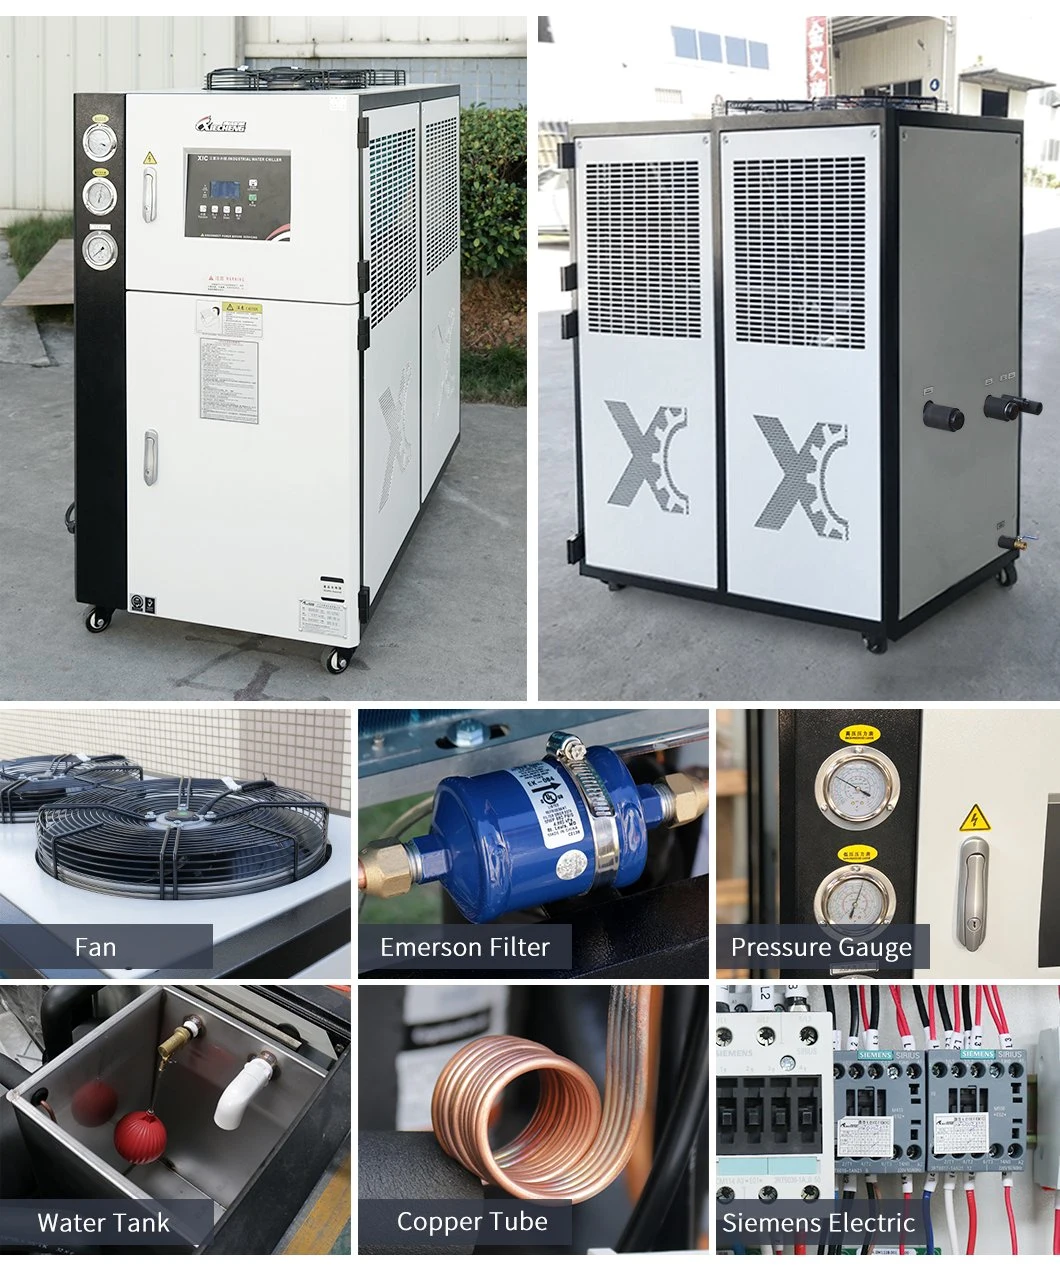 Xiecheng R22/R407c 5HP Low Temp Compressor Industrial Water Chiller Machine Air Cooled Chiller